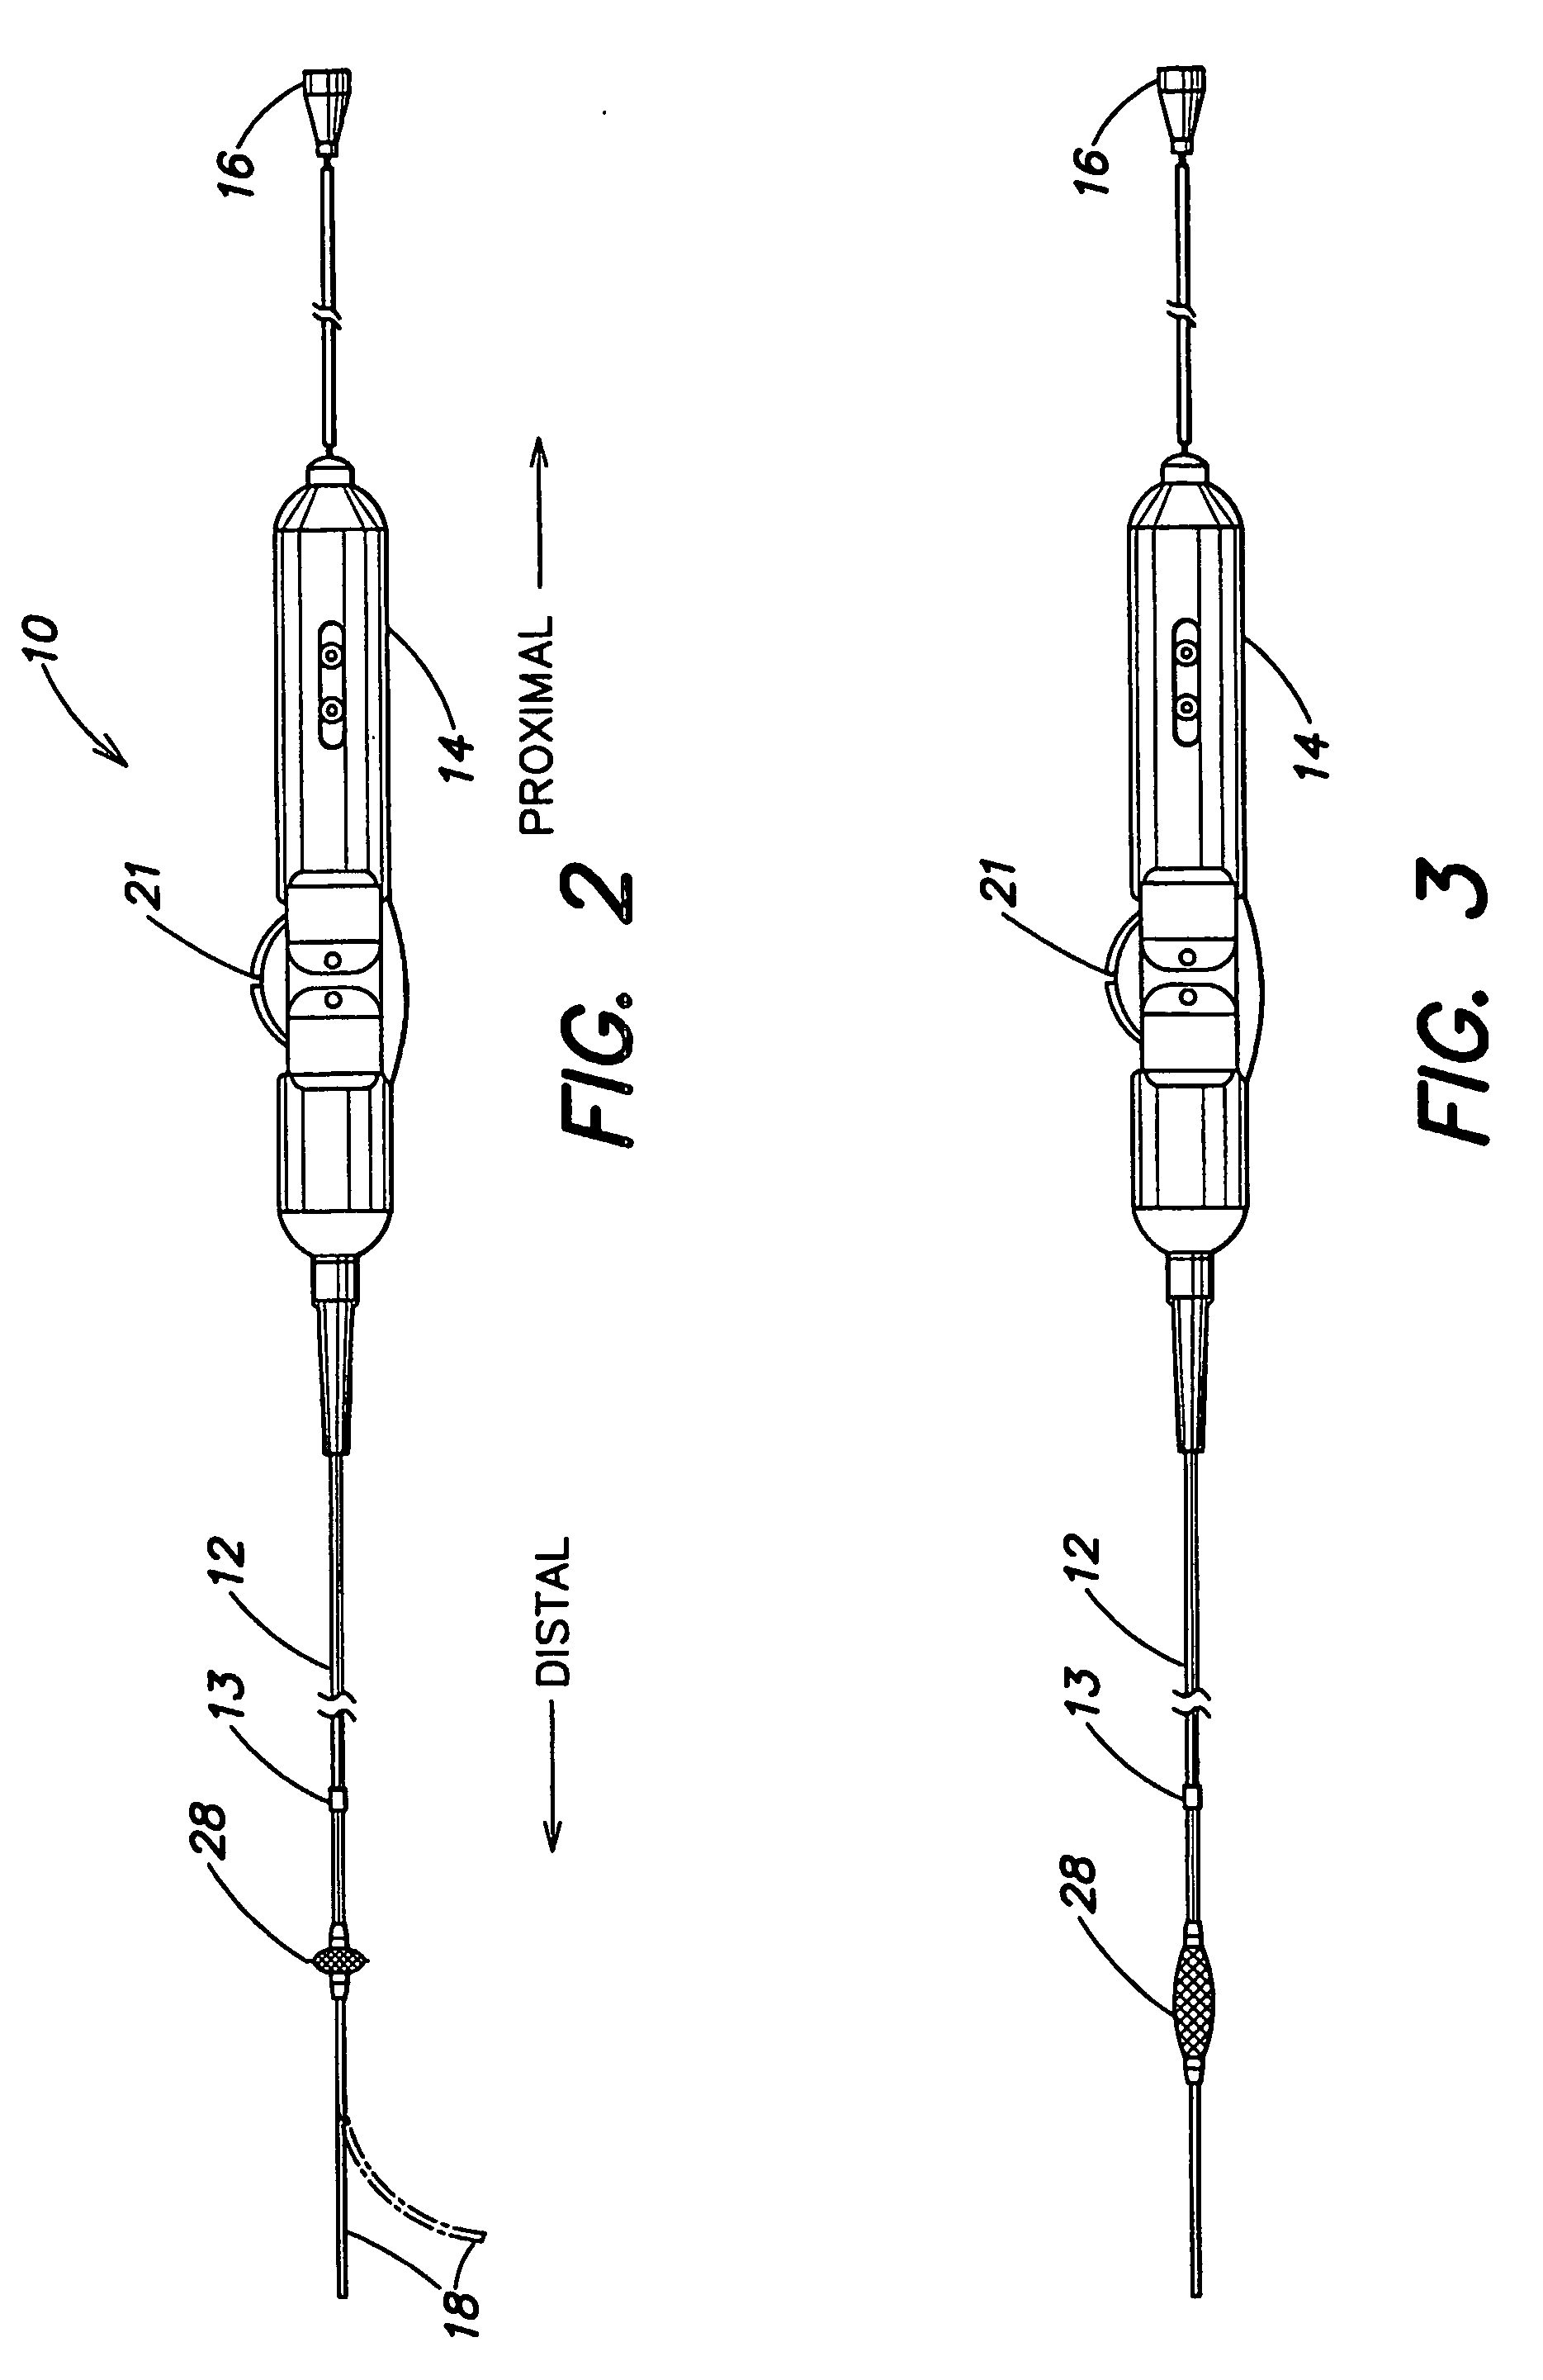 Method and apparatus for control of ablation energy and electrogram acquisition through multiple common electrodes in an electrophysiology catheter